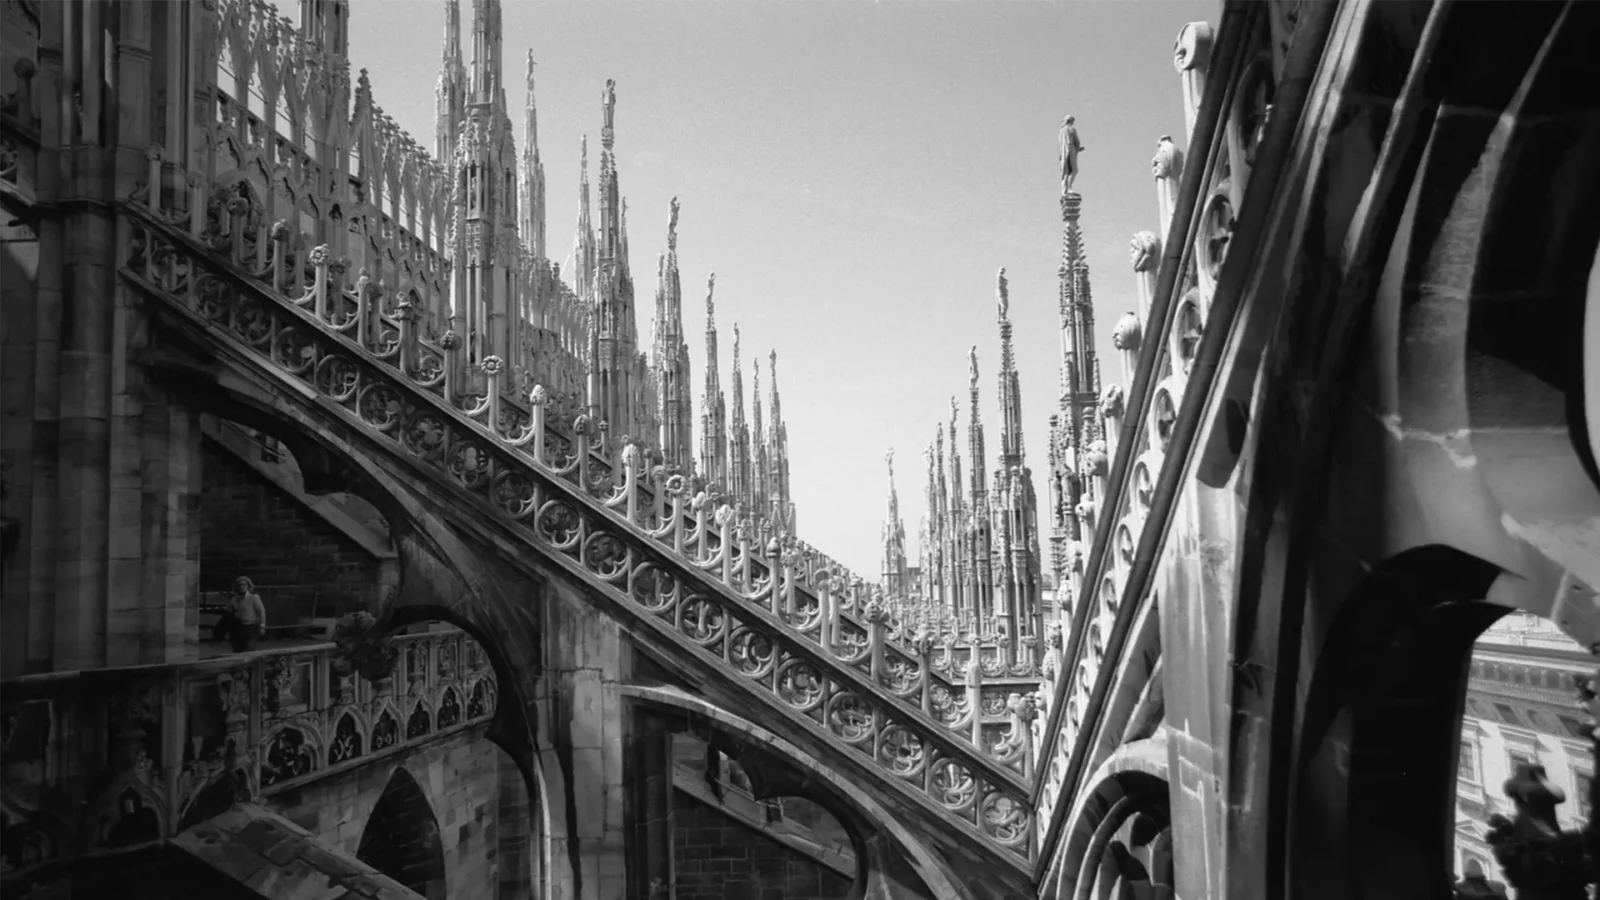 A black and white photo of the roof of the Duomo di Milano cathedral in Milan, Italy.